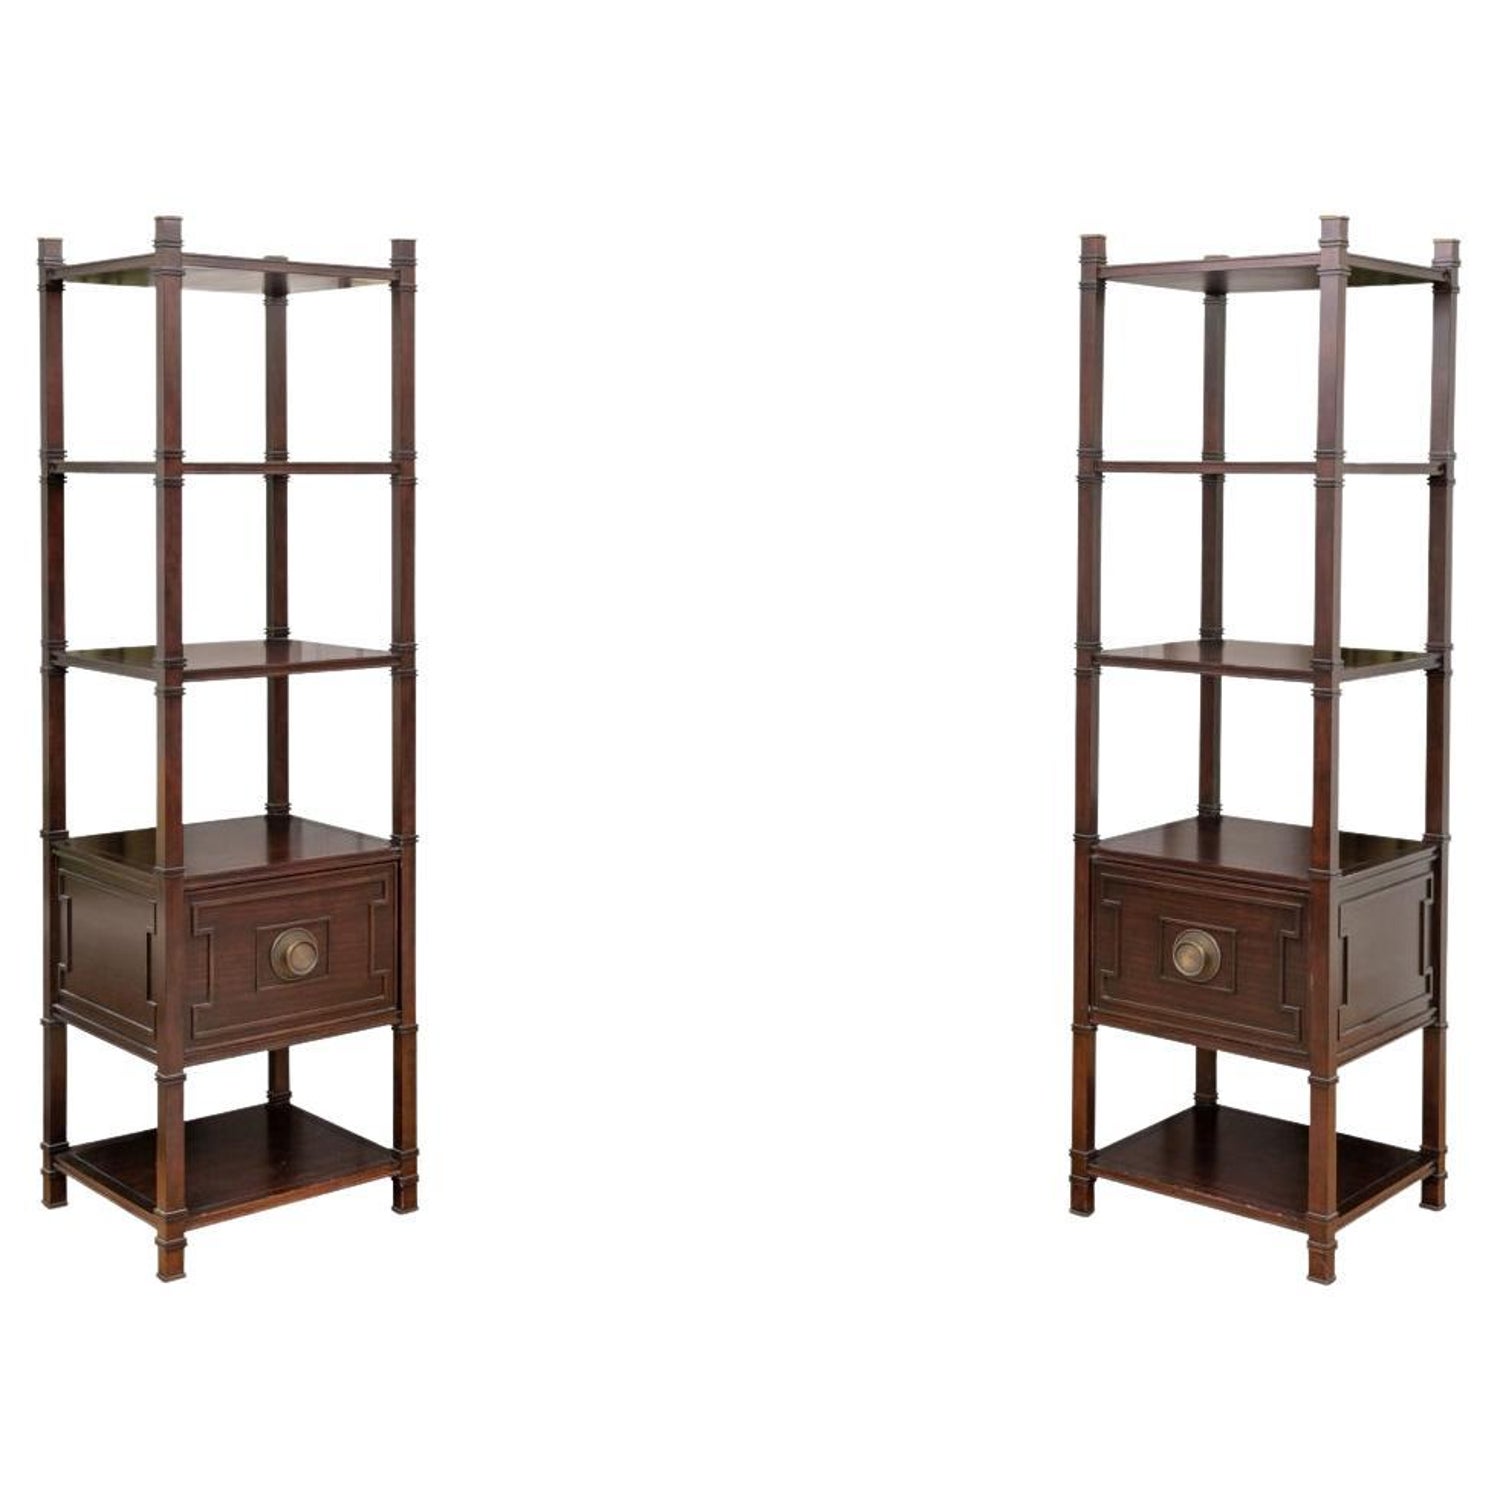 STUNNING Vintage Brass Faux Bamboo Glass Bookcase Mid Century